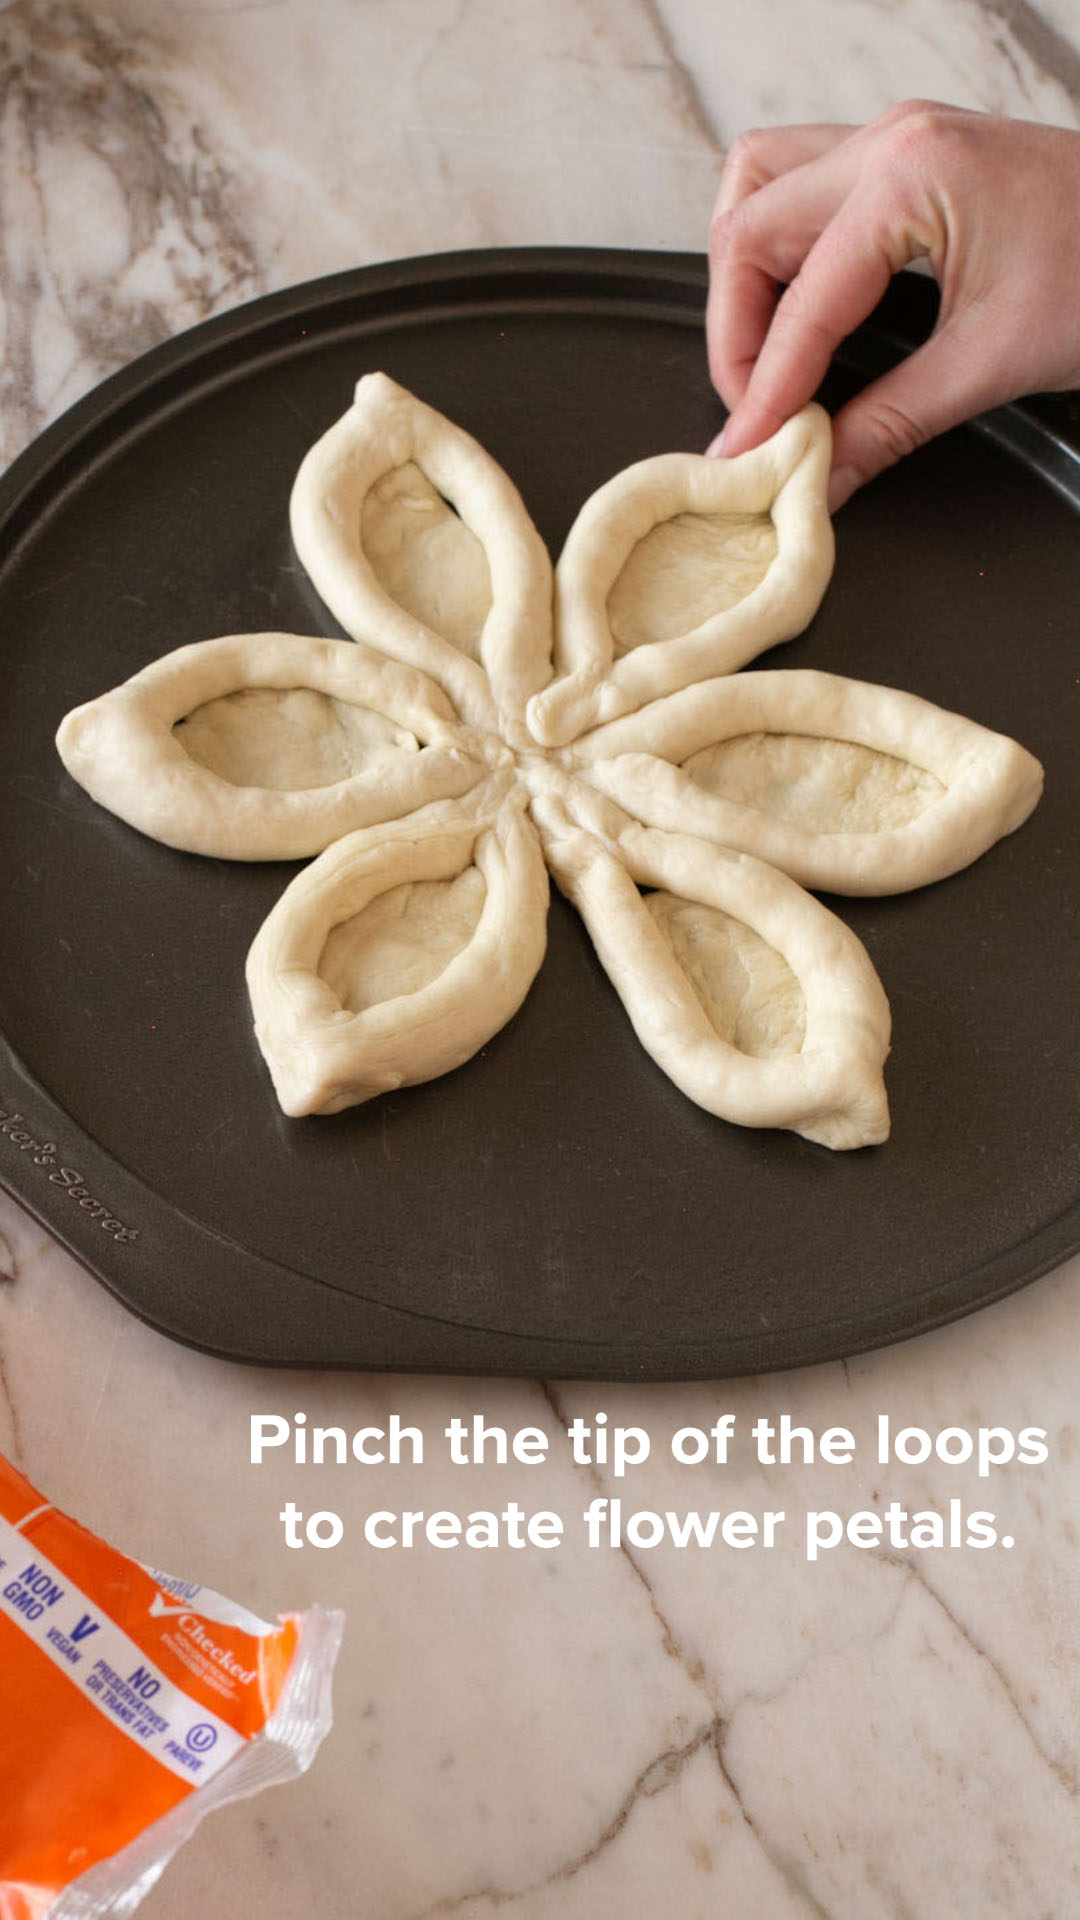 Pinch to the tops of each loop to create a flower petal shape.